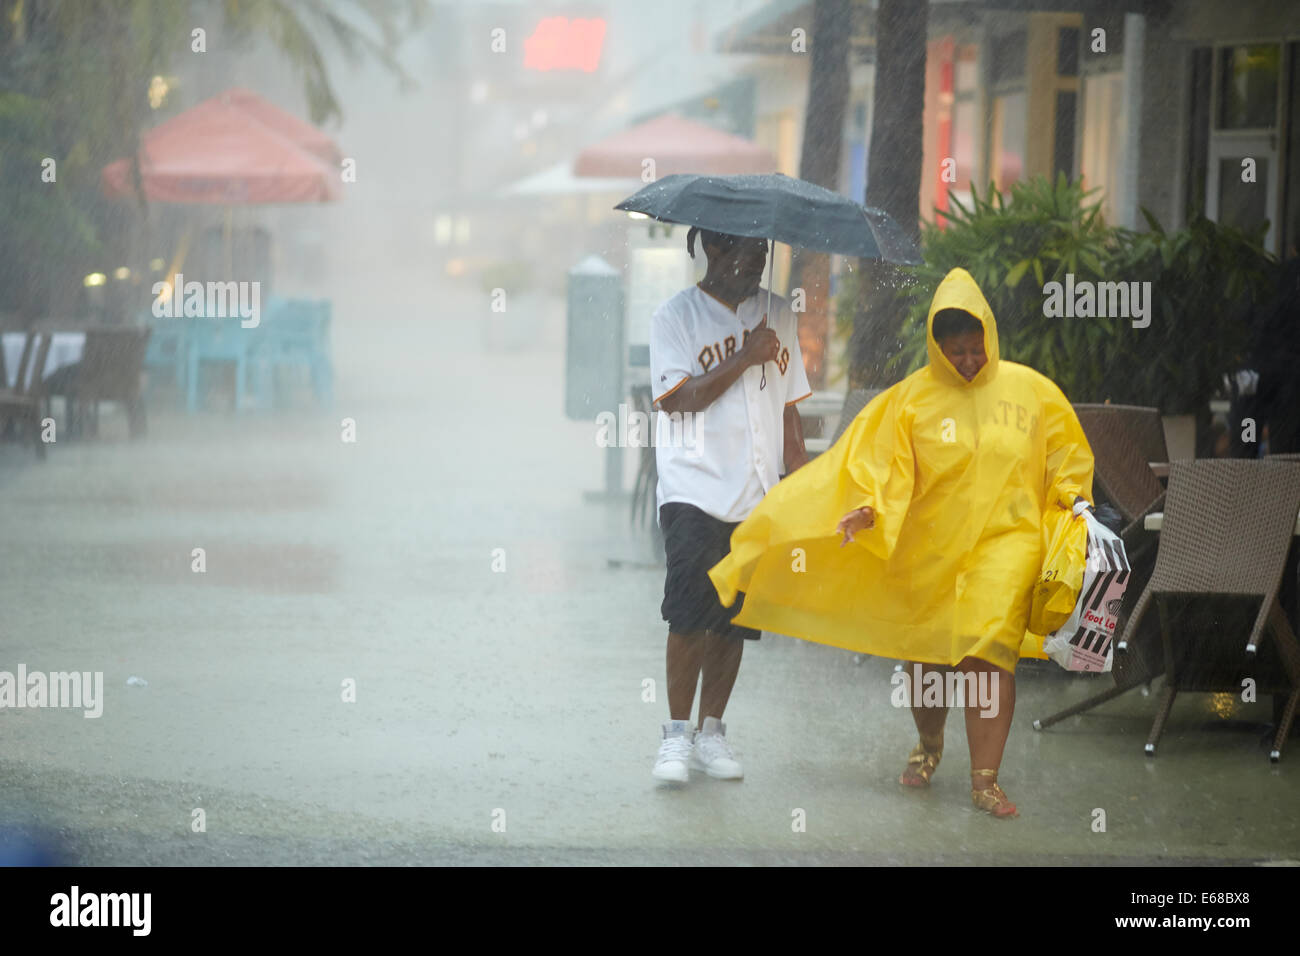 A man holding an umbrella and a woman wearing a rain coat to keep themselves out the rain storm Stock Photo